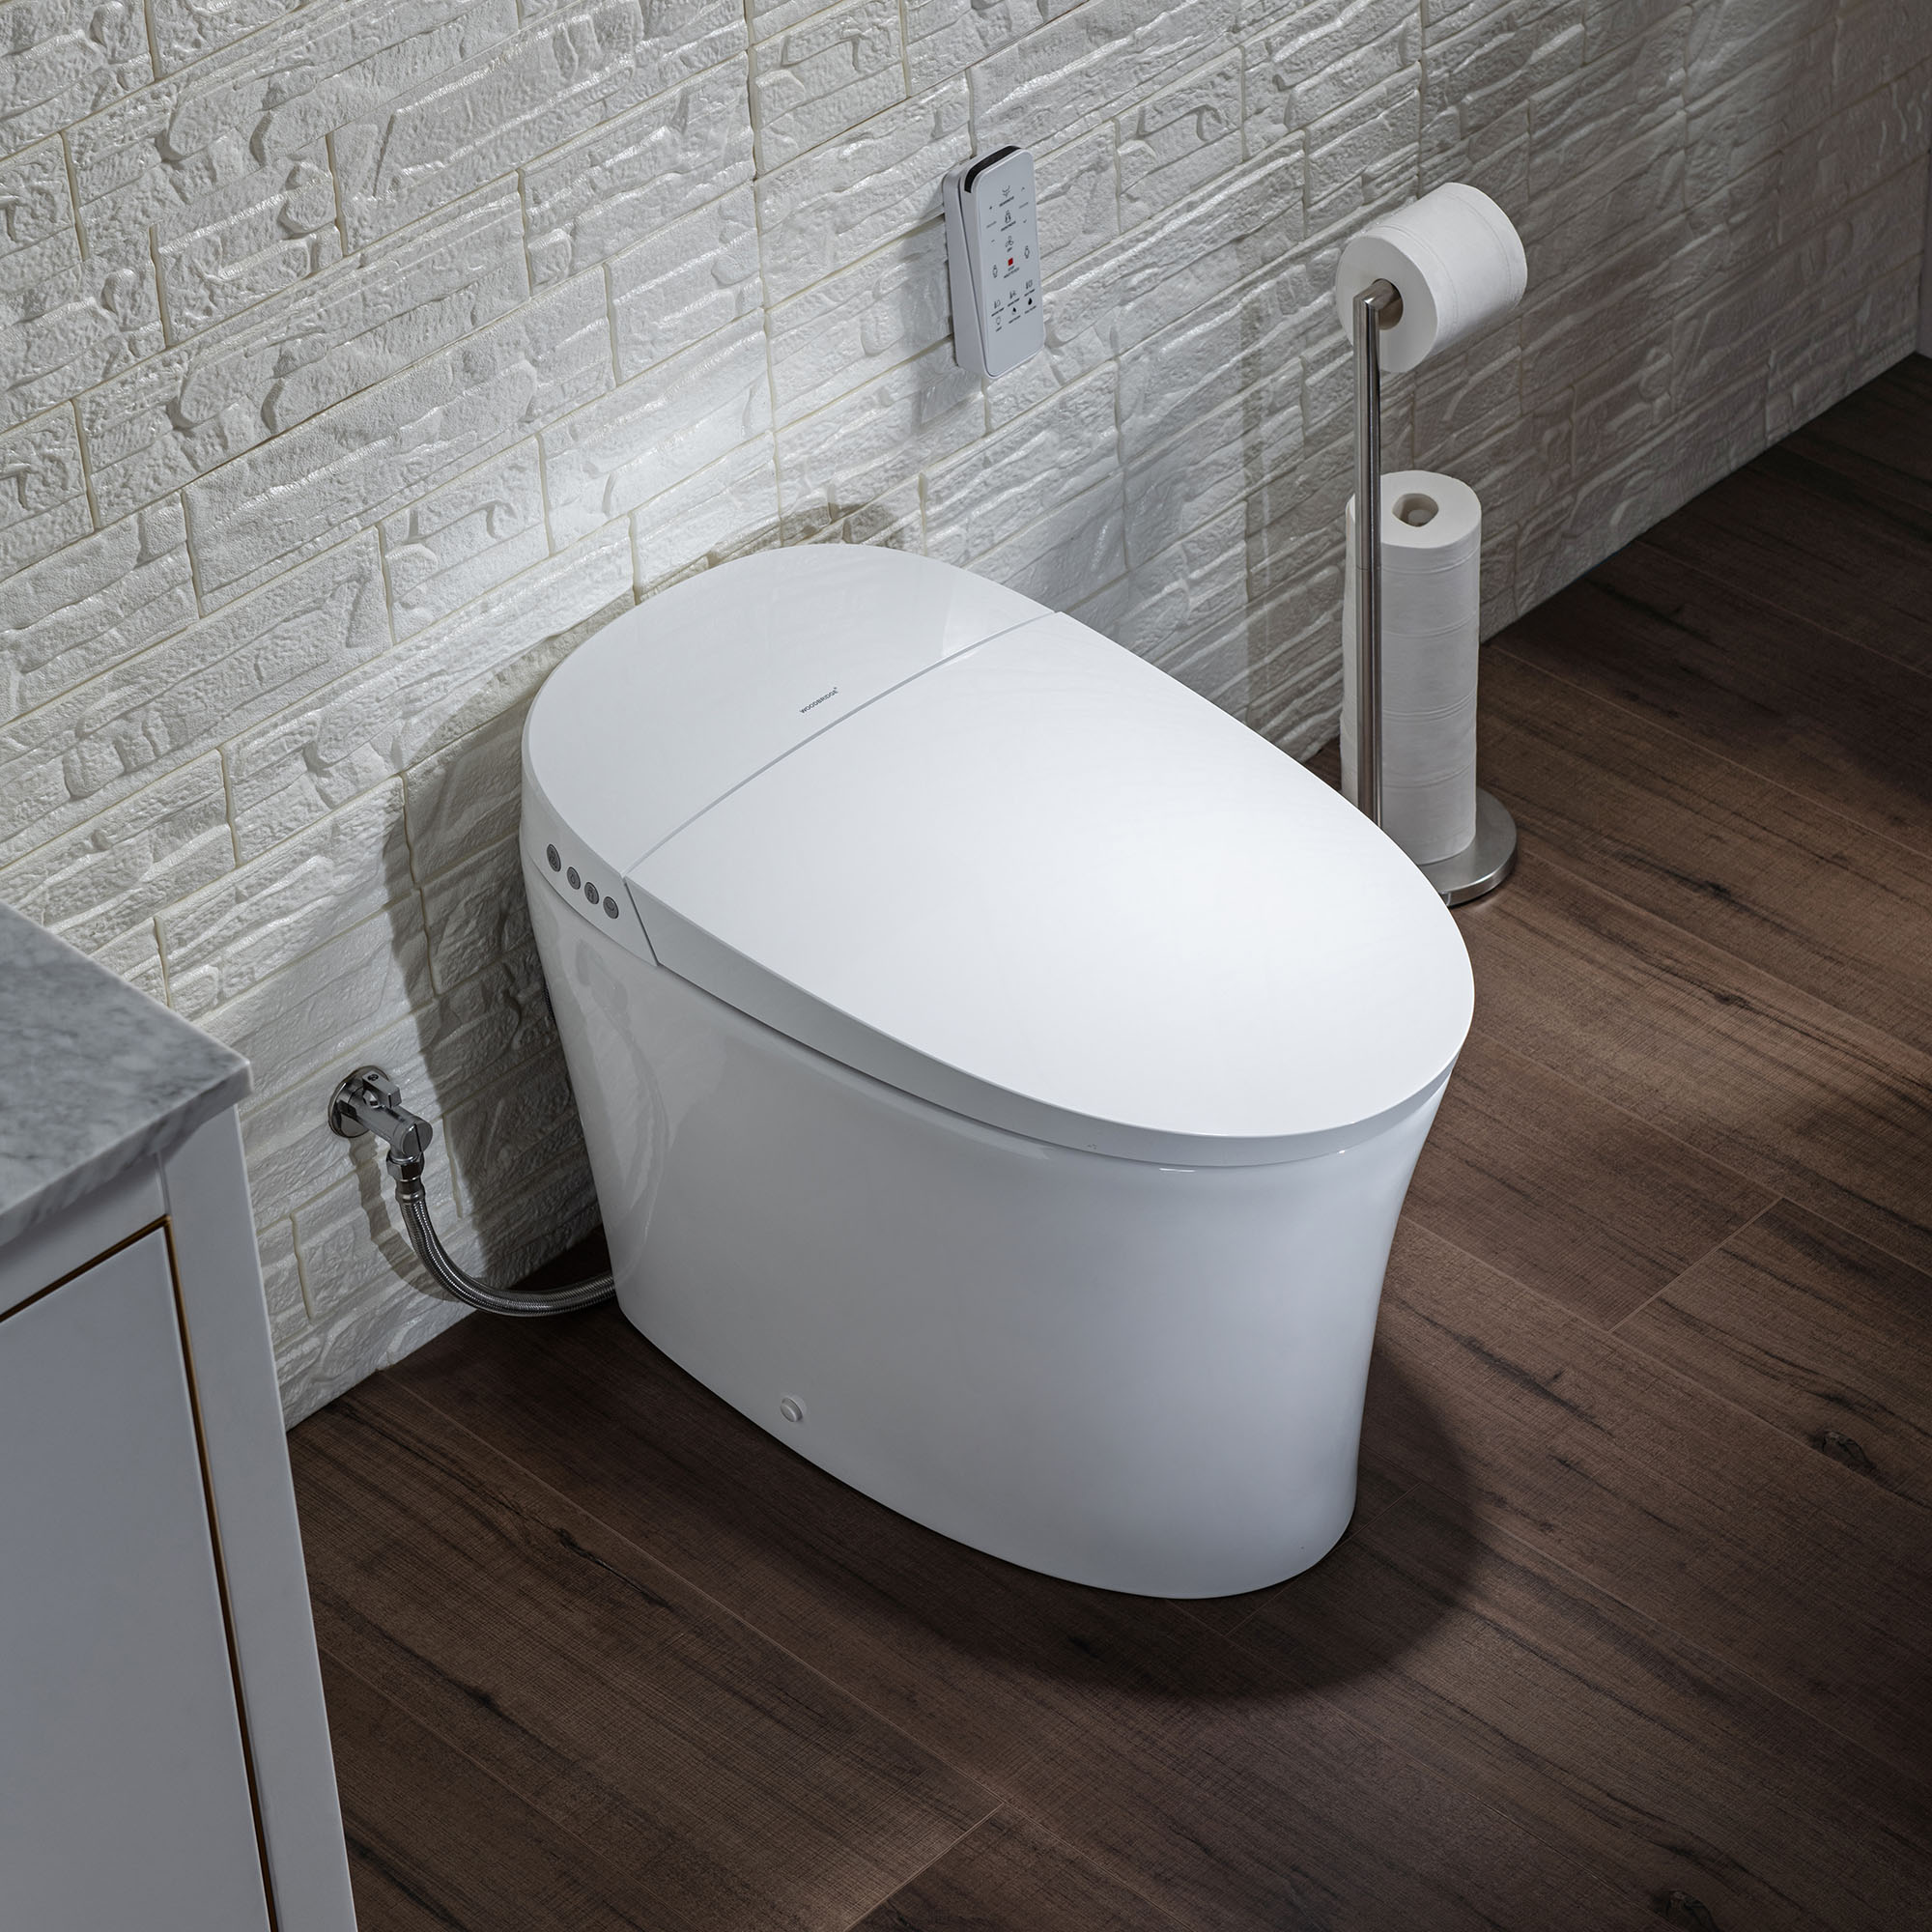  WOODBRIDGE B0970S Smart Bidet Tankless Toilet Elongated One Piece Chair Height, Auto Flush, Foot Sensor Operation, Heated Seat with Integrated Multi Function Remote Control in White_12174